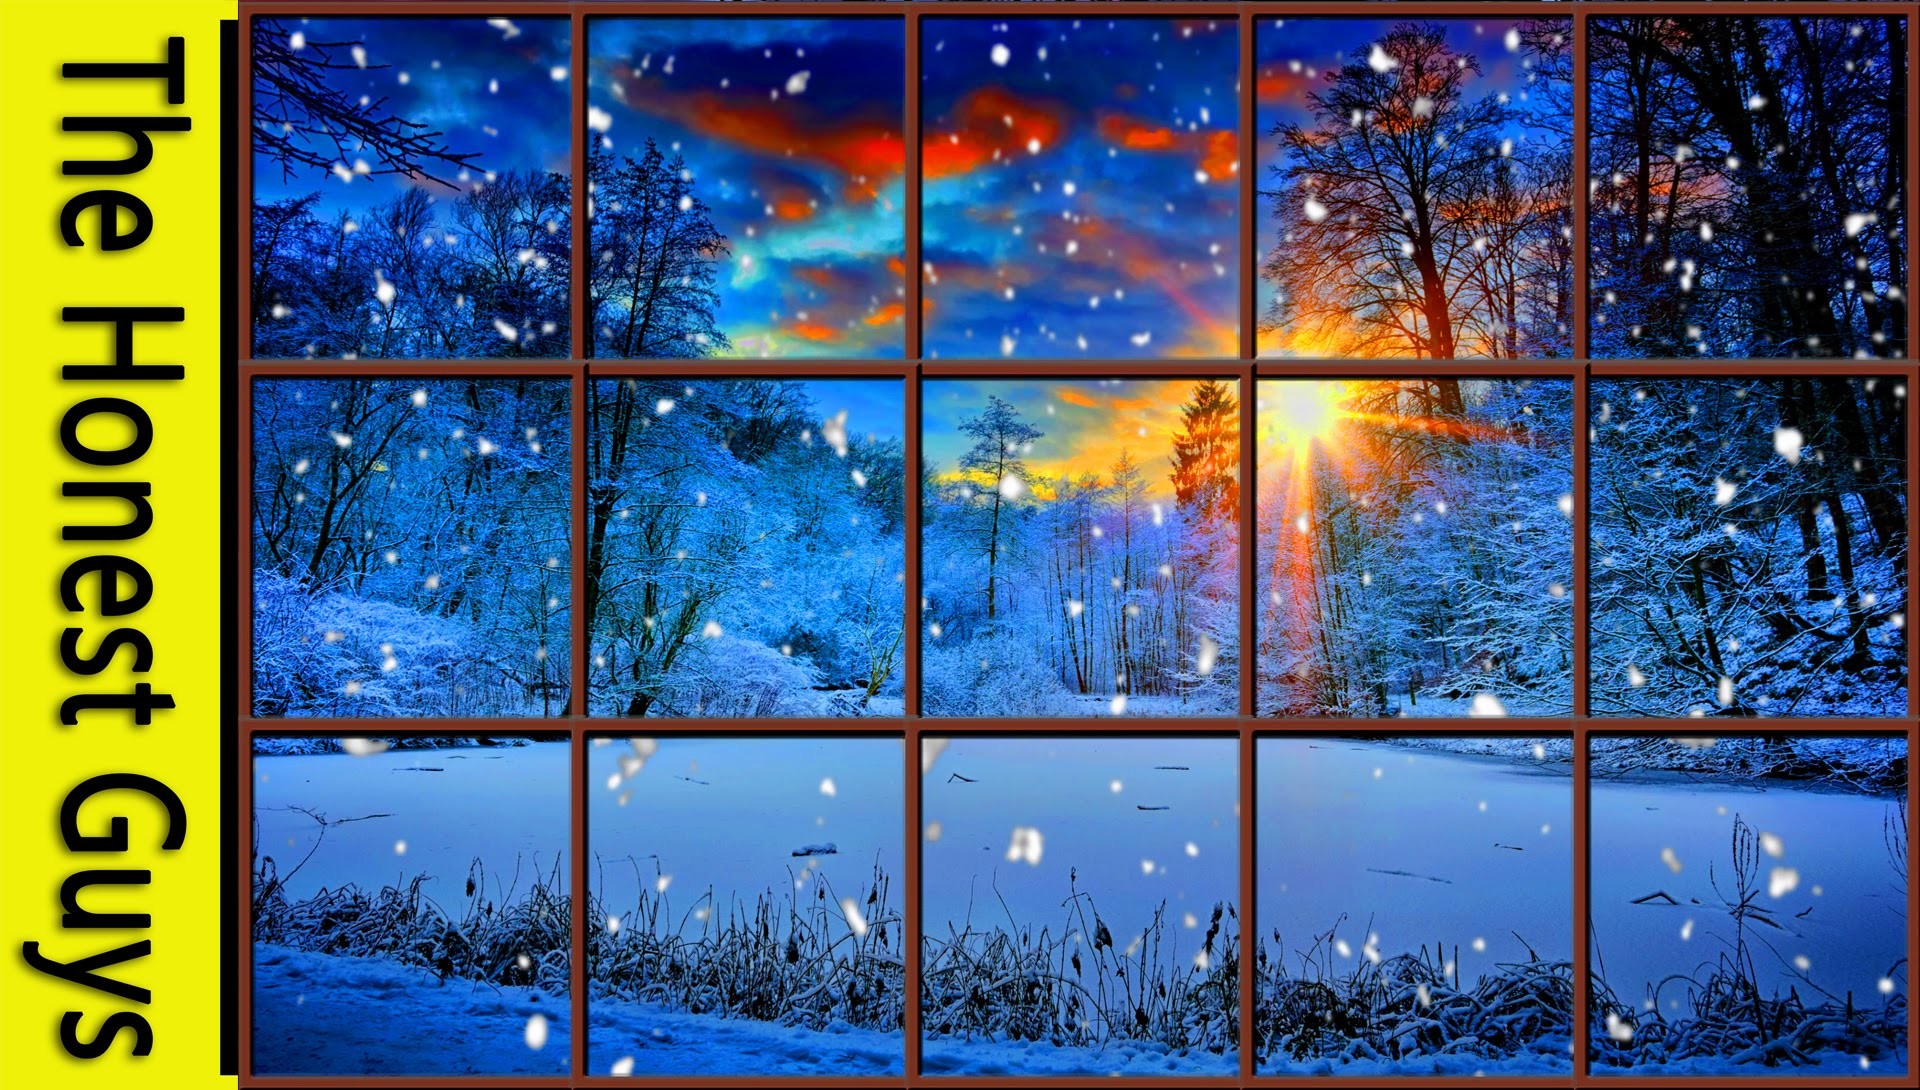 WINTER WINDOW SNOW SCENE 4K – Living Wallpaper with Ambient Fireplace Sounds – YouTube